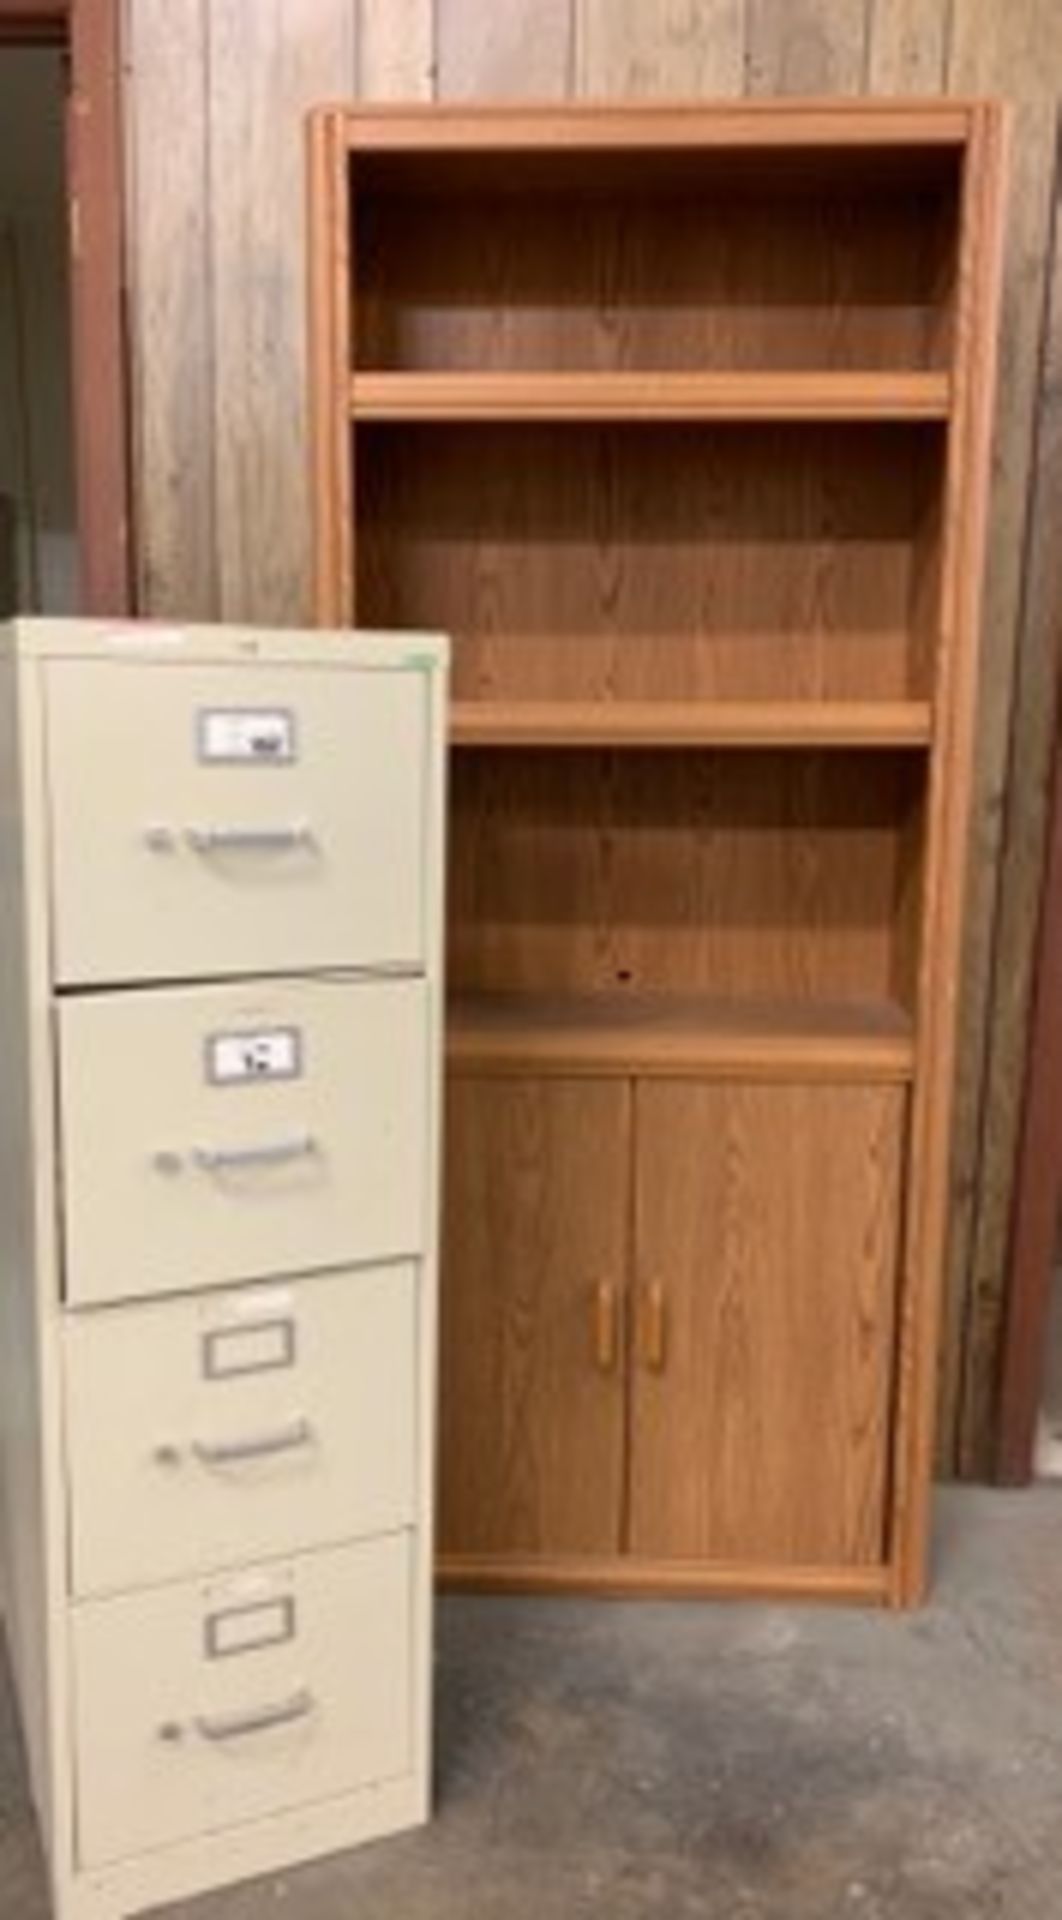 FILE CABINET & SHELF (LOCATED AT: 16335 LIMA ROAD, HUNTERTOWN, IN 46748)